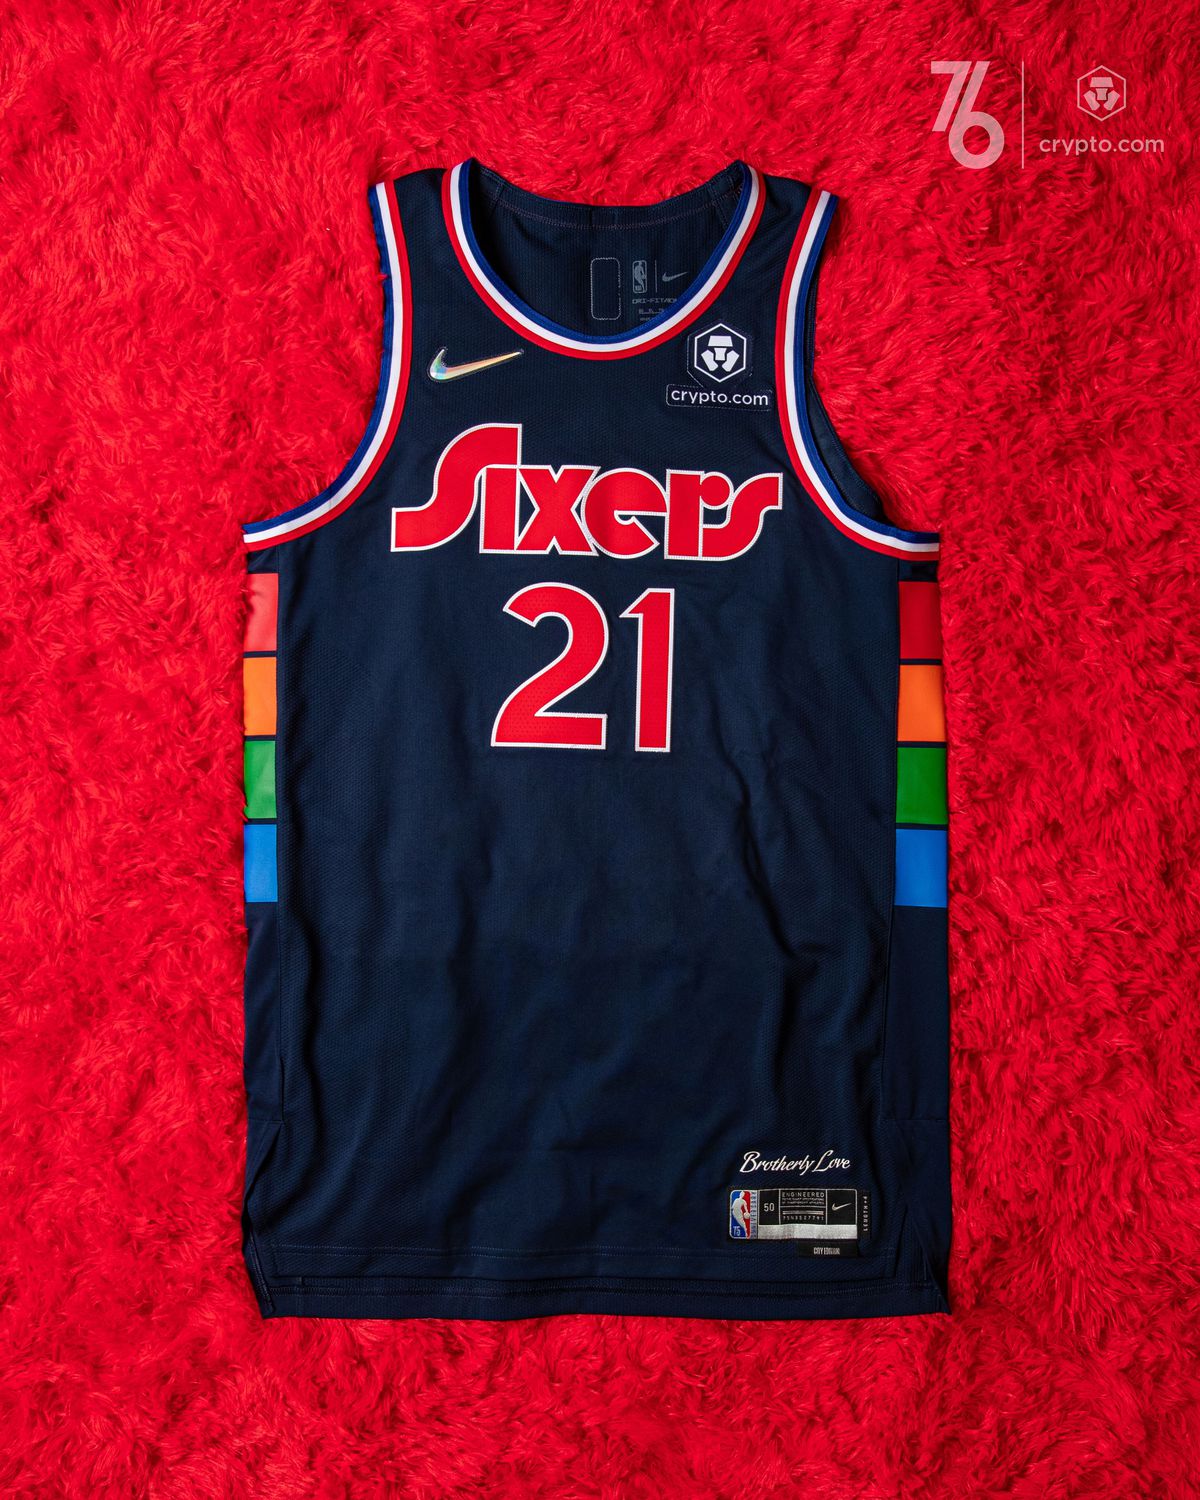 sixers city edition jersey for sale